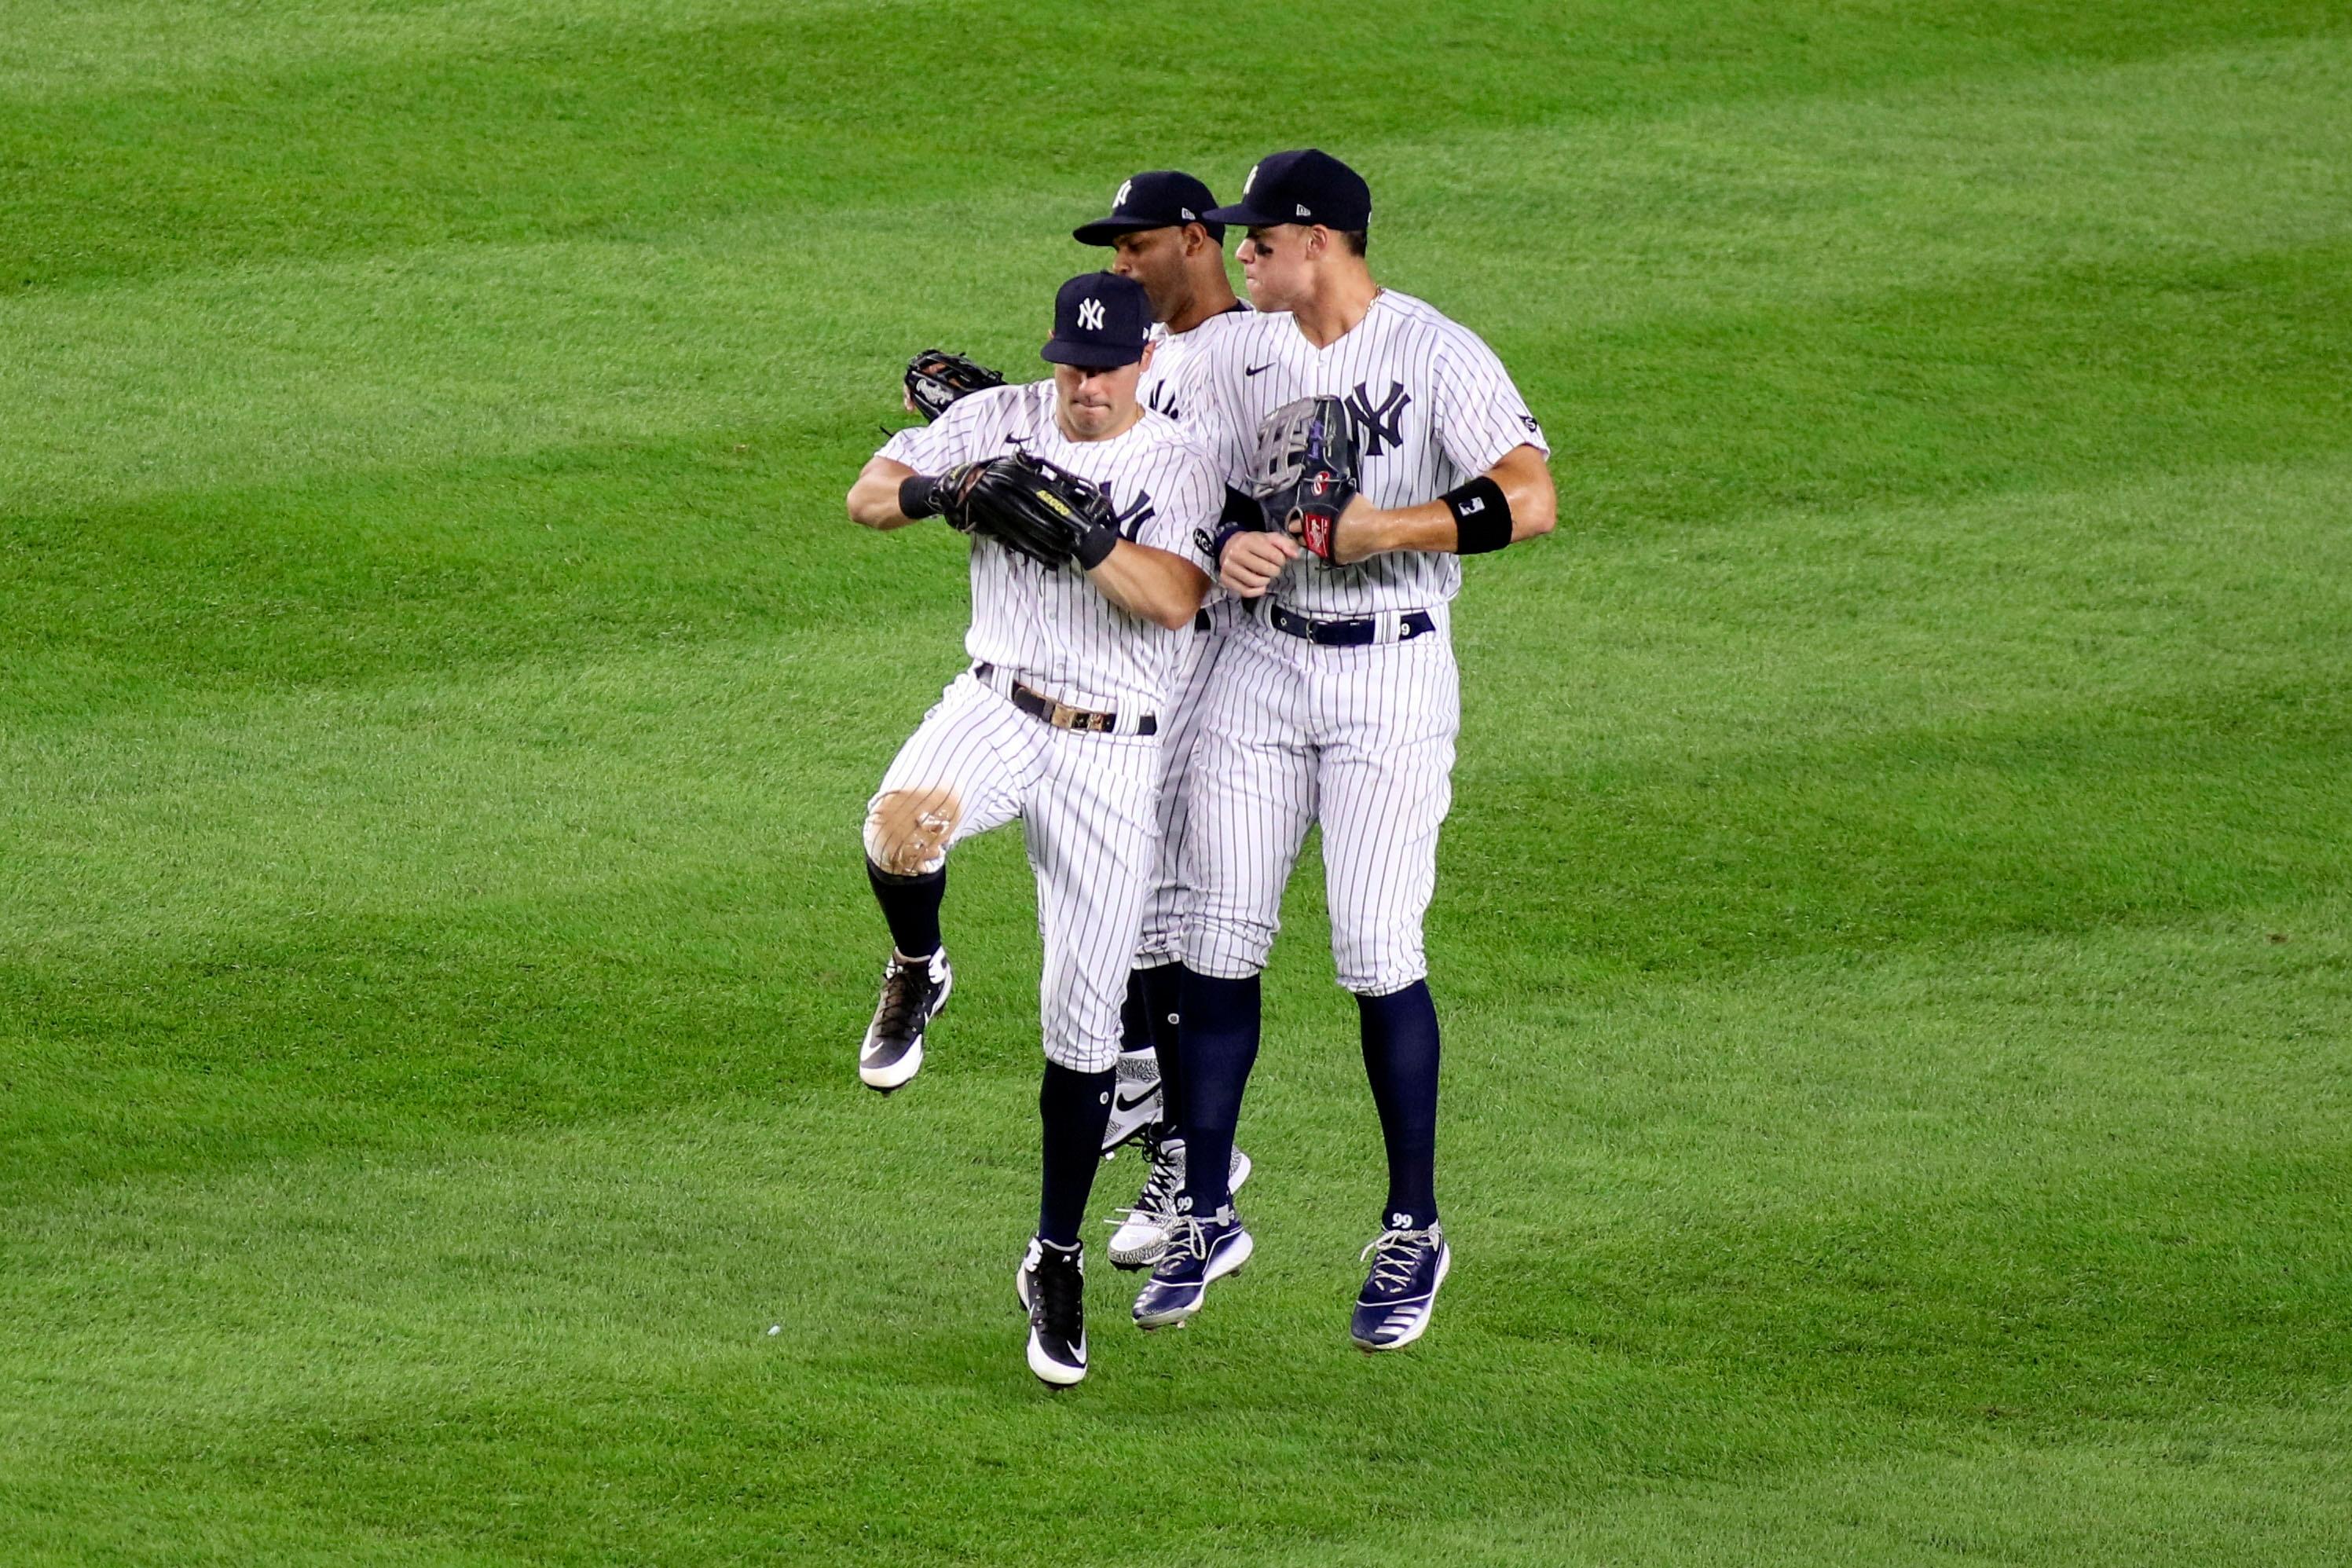 Aug 2, 2020; Bronx, New York, USA; New York Yankees outfielders Mike Tauchman (39), Aaron Hicks (31) and Aaron Judge (99) celebrate a 9-7 victory over the Boston Red Sox at Yankee Stadium. Mandatory Credit: Wendell Cruz-USA TODAY Sports / © Wendell Cruz-USA TODAY Sports